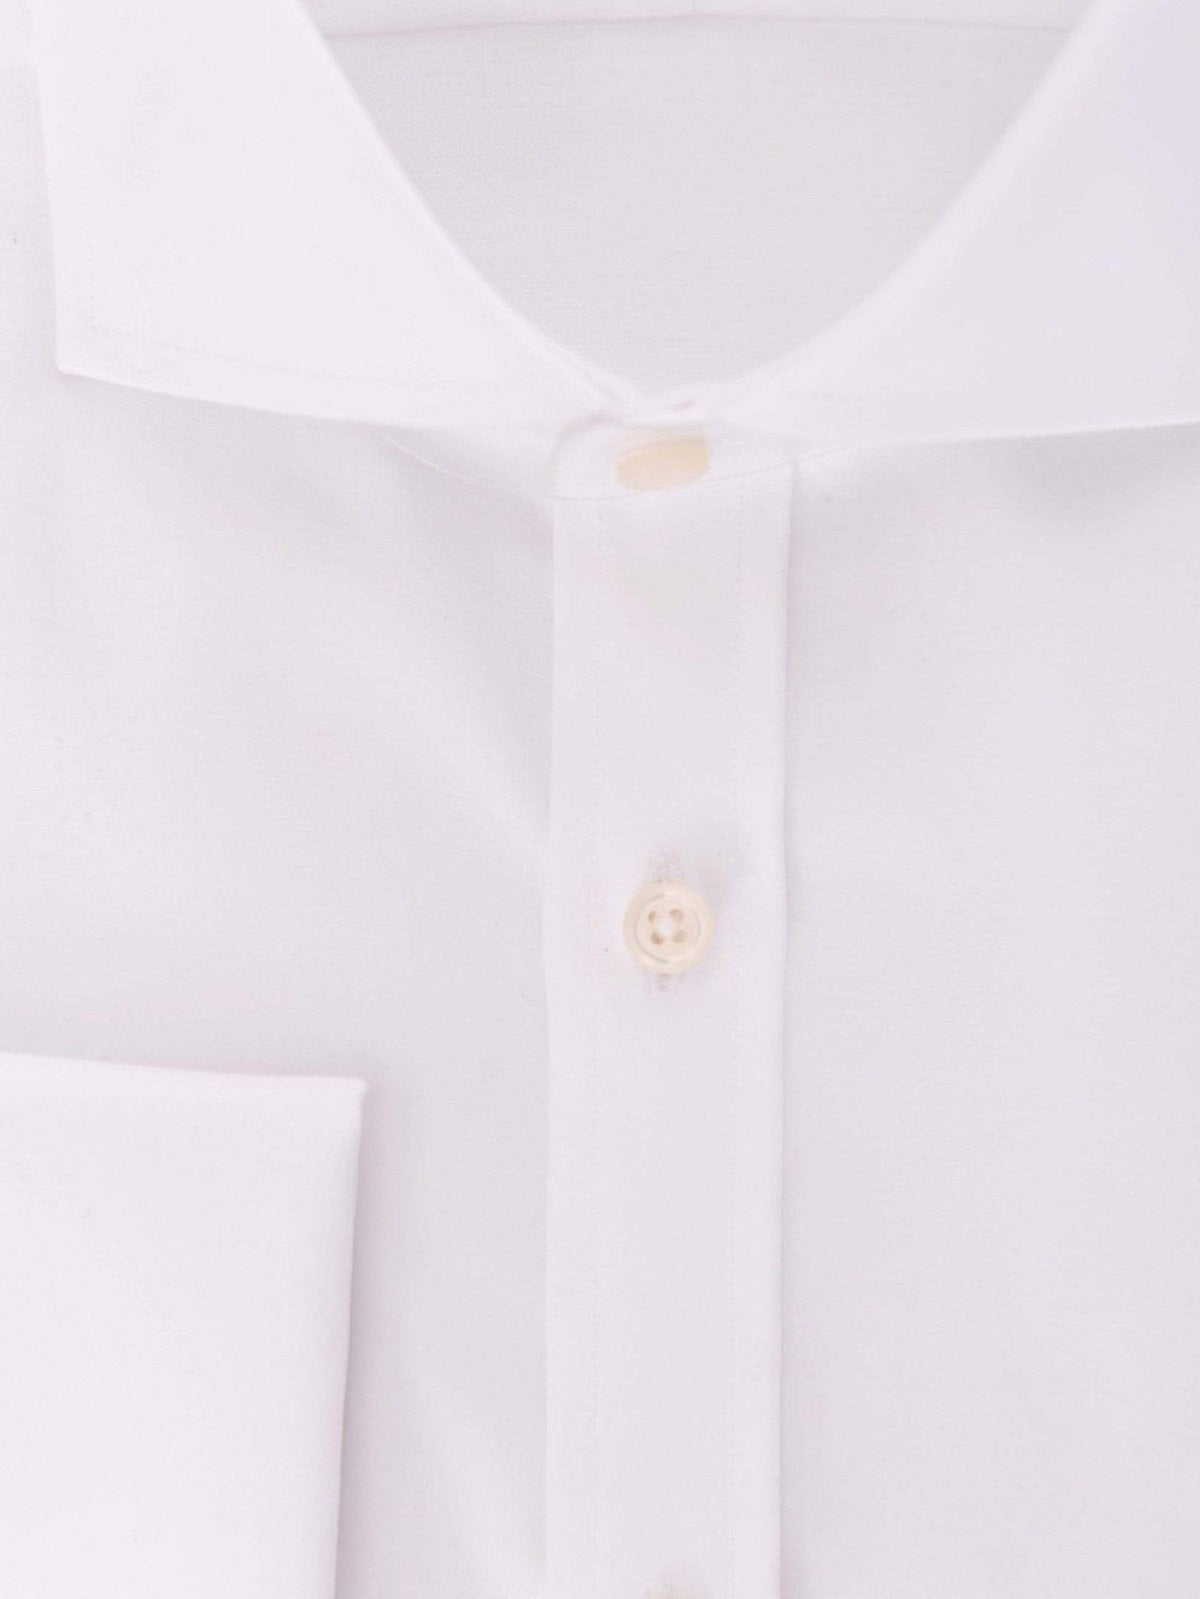 Christopher Morris Bestselling Items Christopher Morris Men&#39;s 100% Cotton Non-Iron White French Cuff Dress Shirt